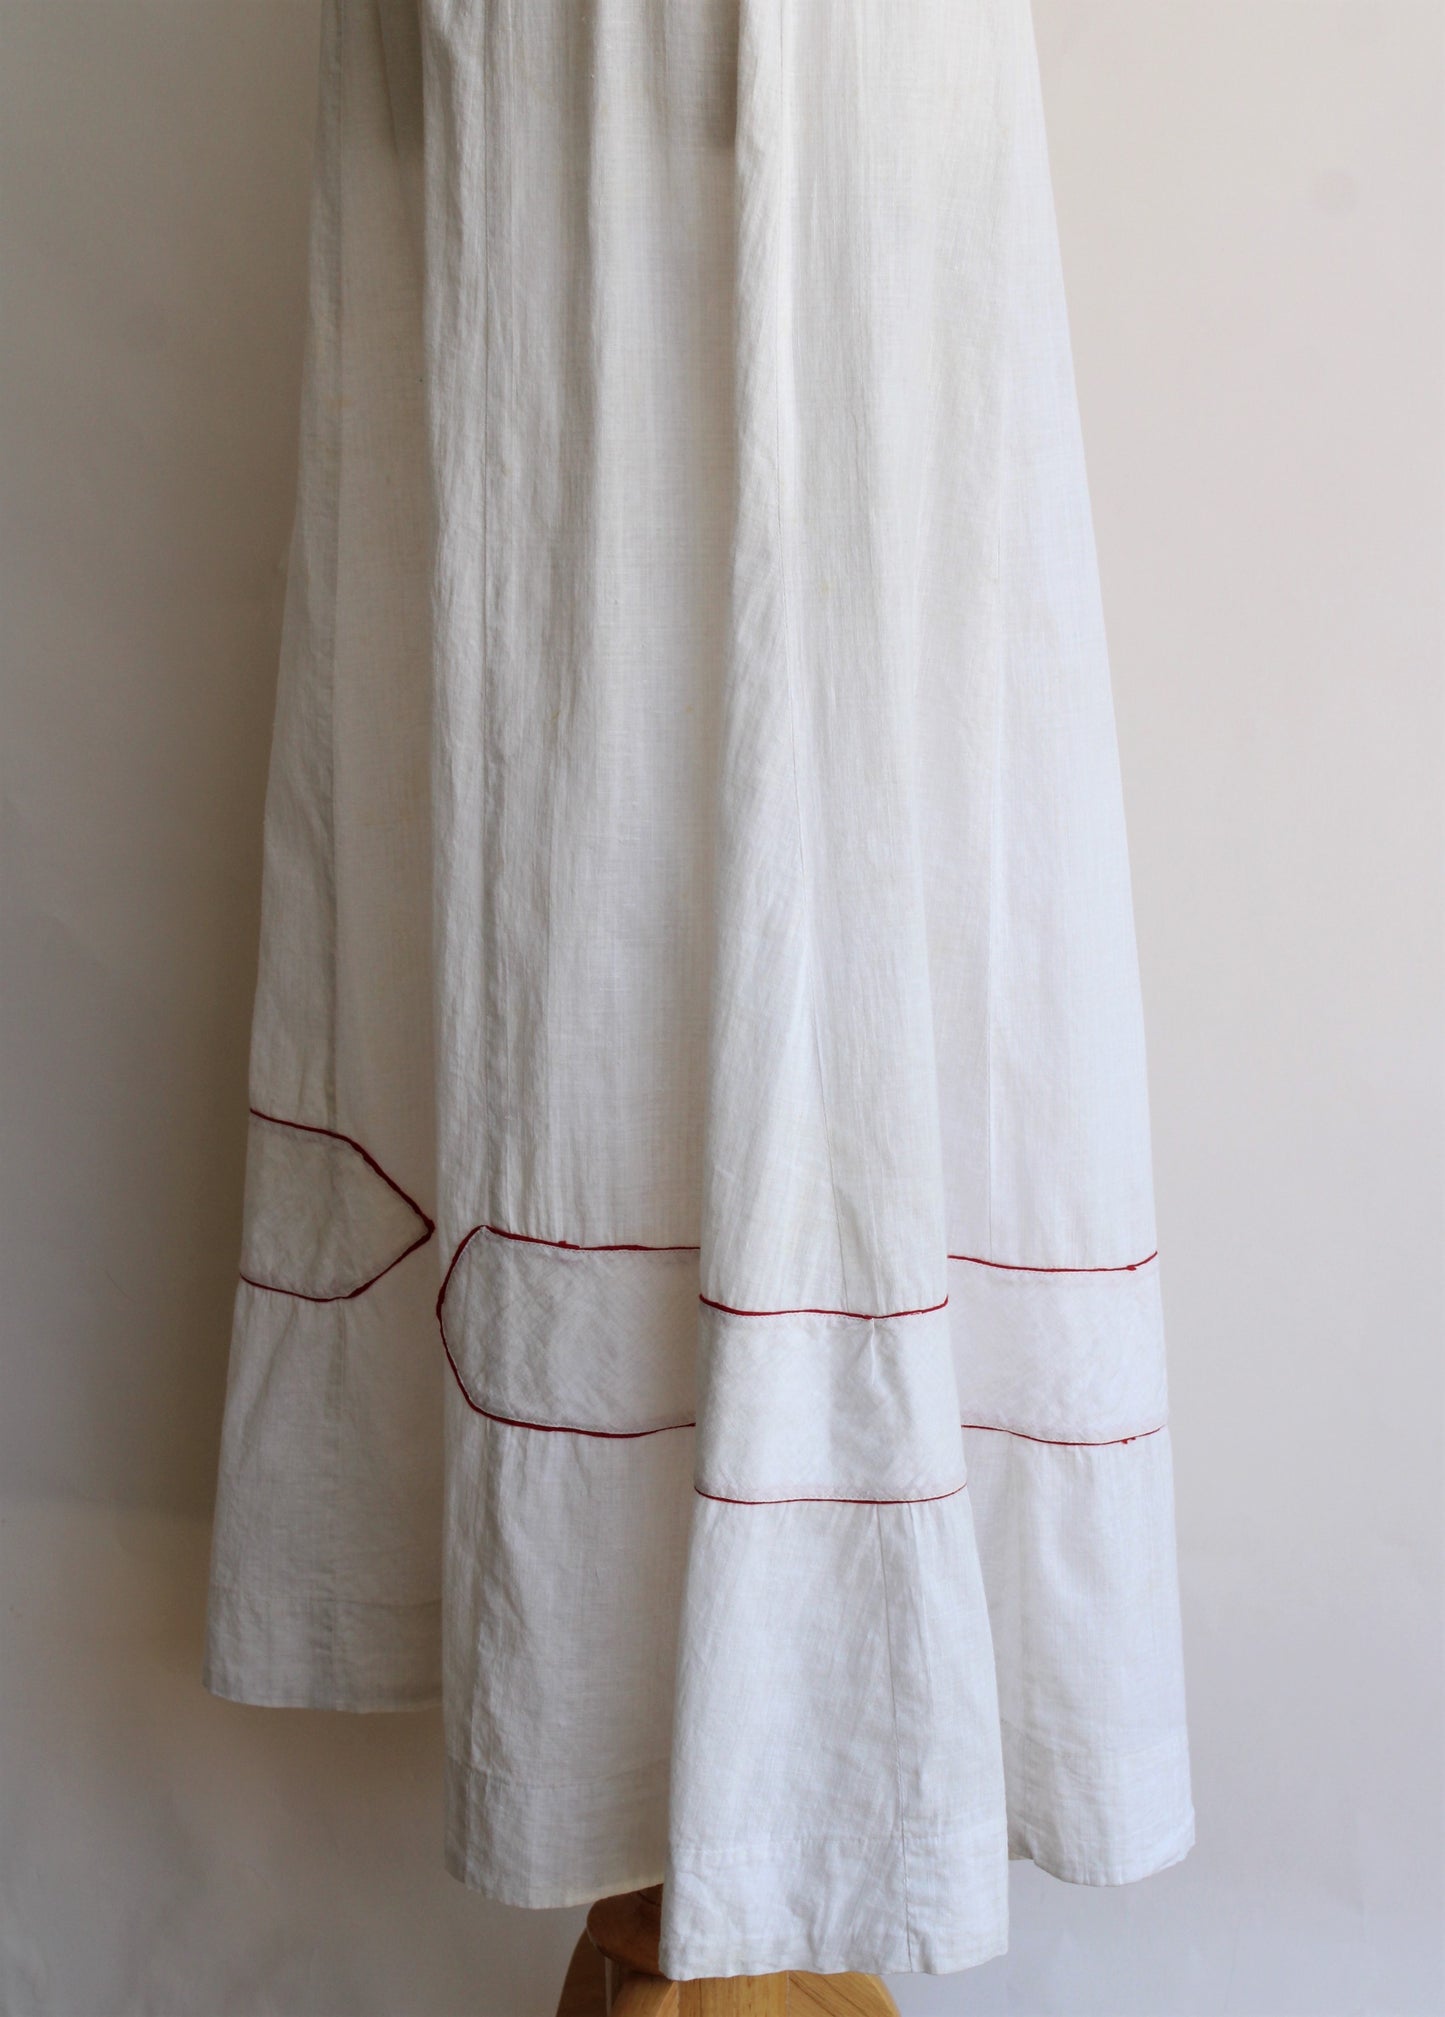 Antique Edwardian White Cotton Petticoat With Red Trim